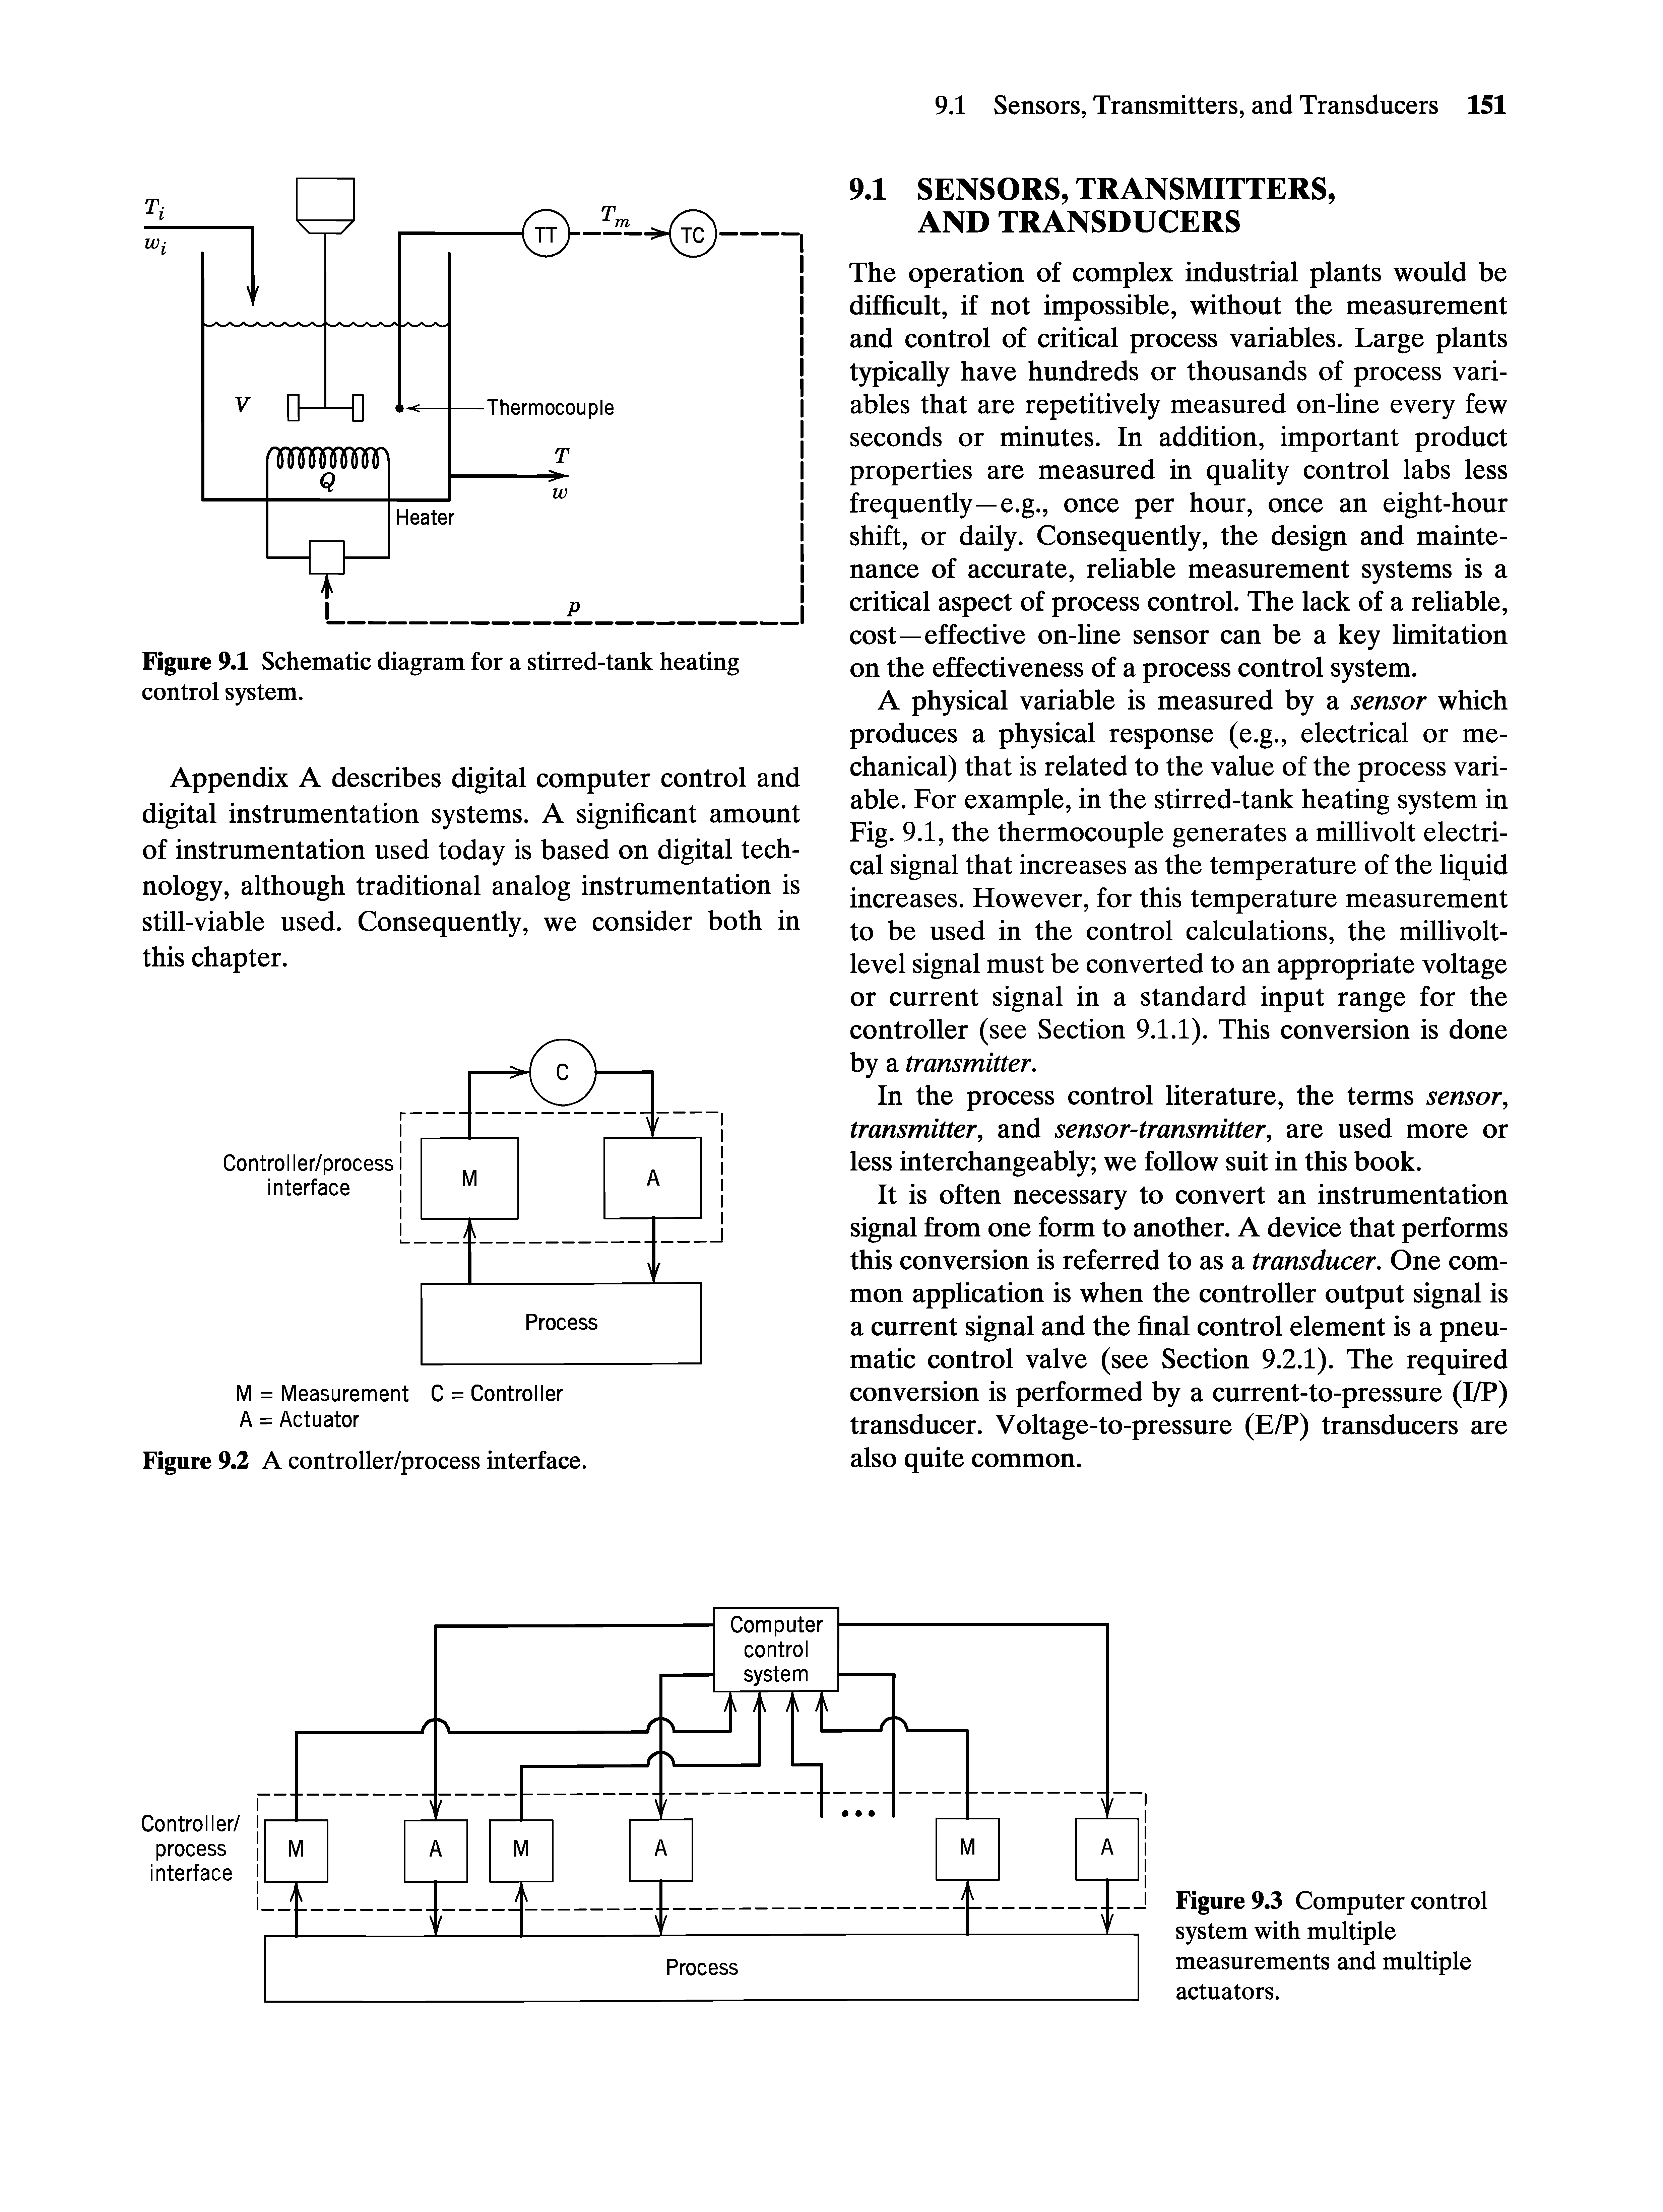 Figure 9.1 Schematic diagram for a stirred-tank heating control system.